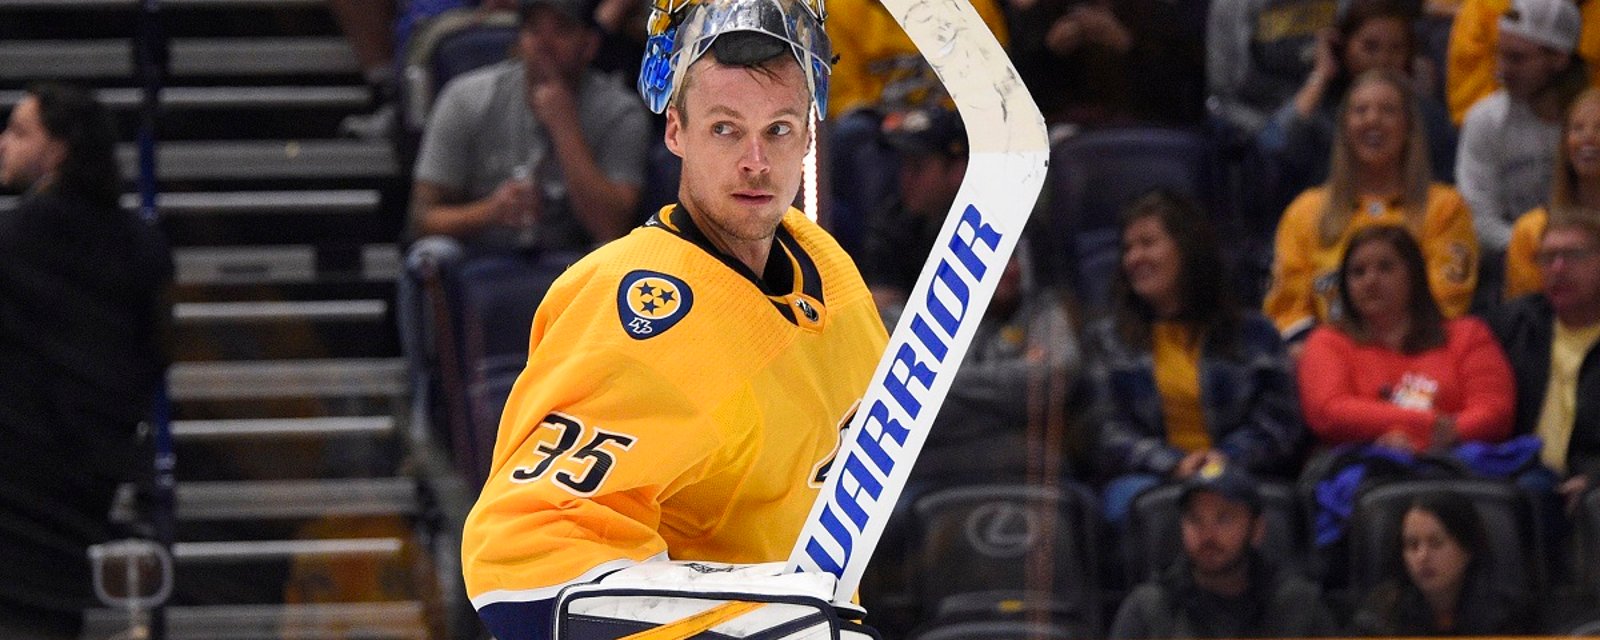 Breaking: Predators sign Rinne to a surprising new contract.